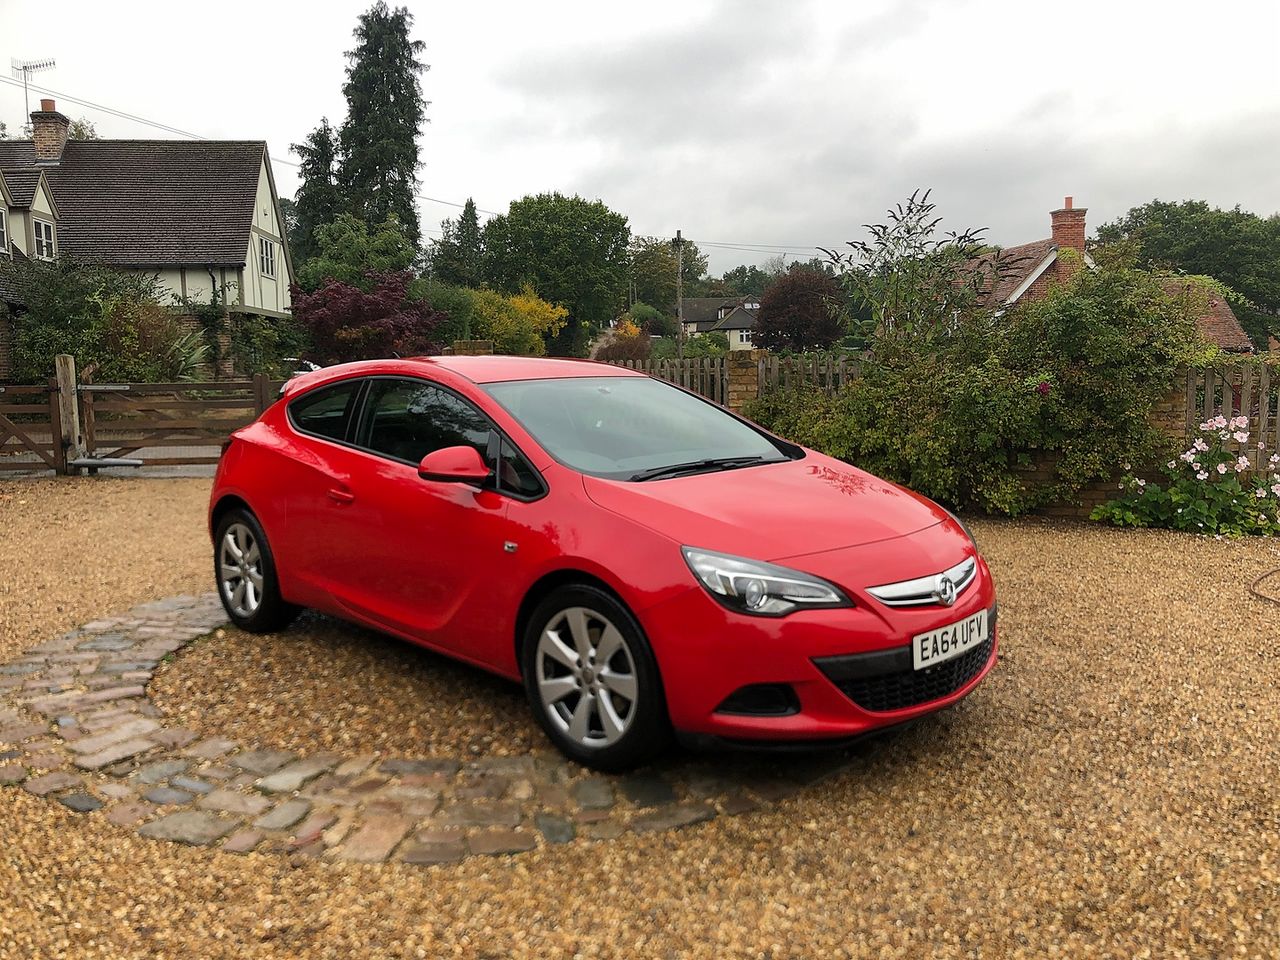 2014 VAUXHALL Astra GTC SPORT 1.4 16v Turbo 140PS auto - Picture 1 of 13